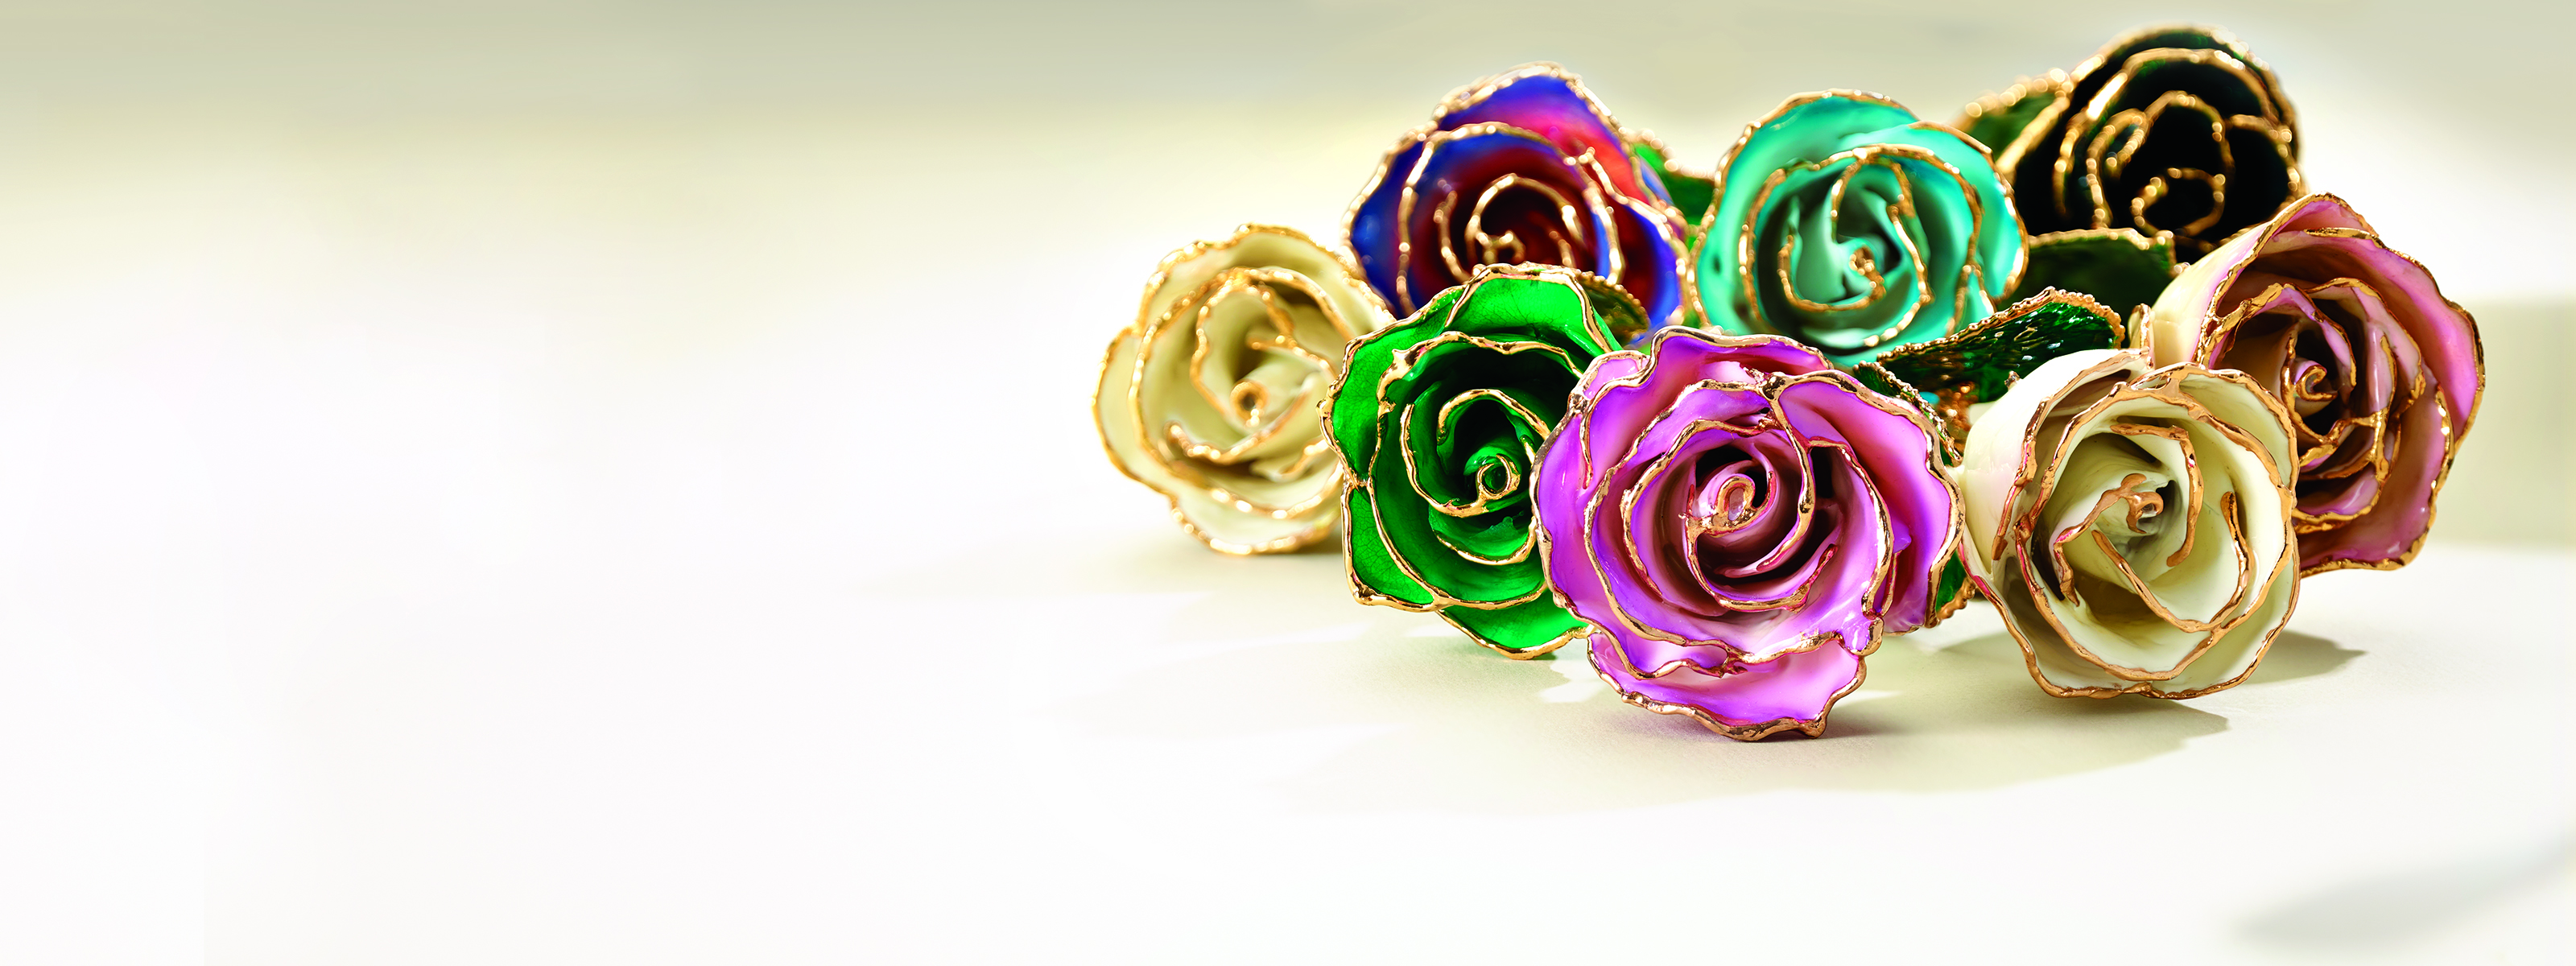 Colorful laquered roses